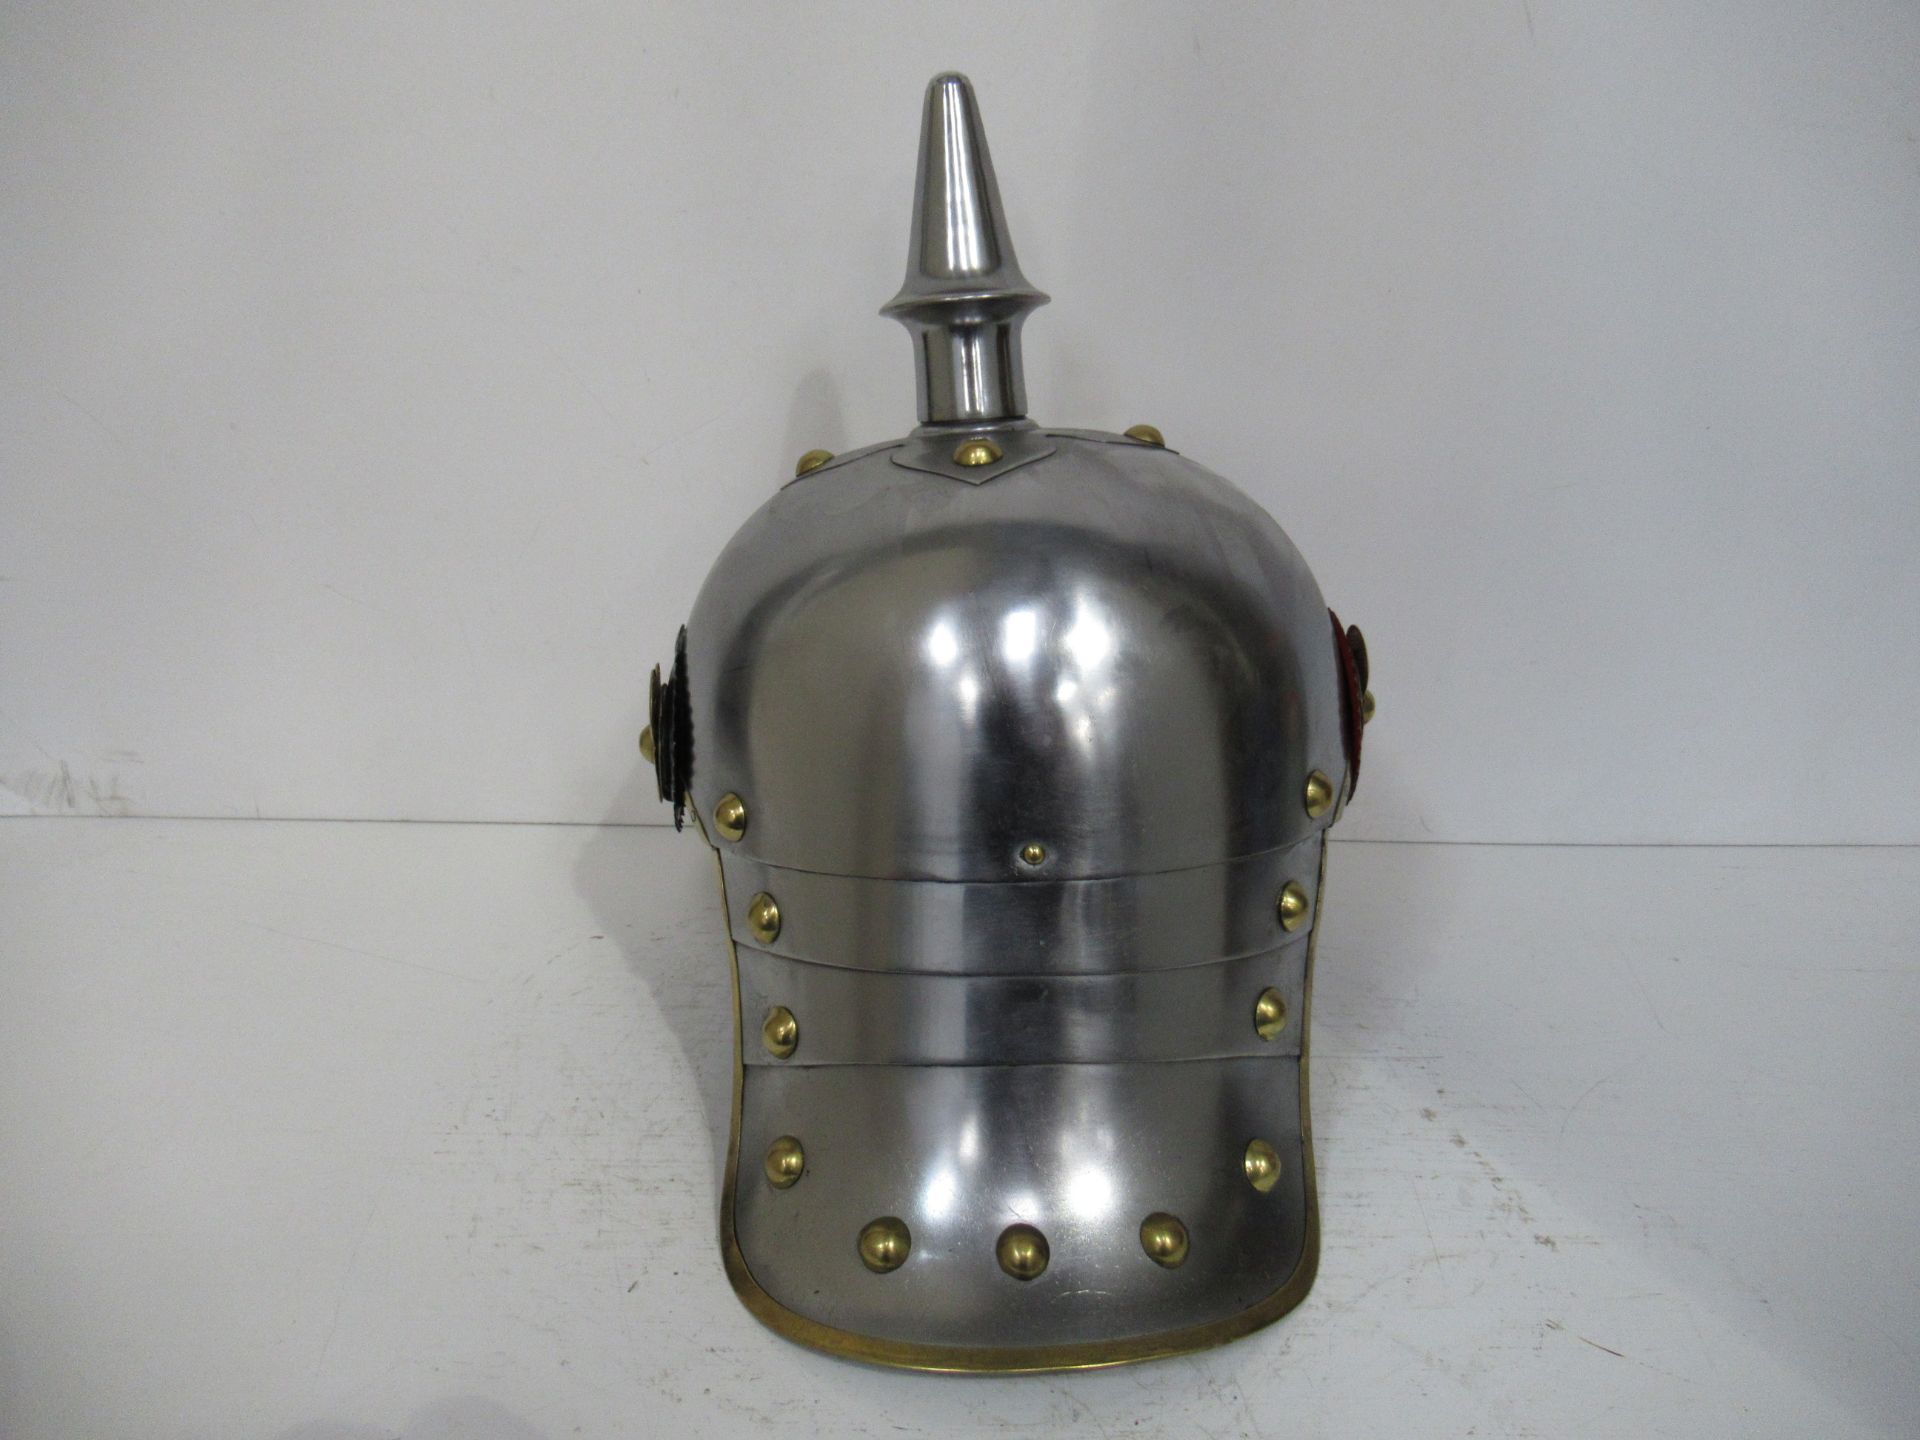 German Prussian Reproduction Helmet with Stand - Image 4 of 5